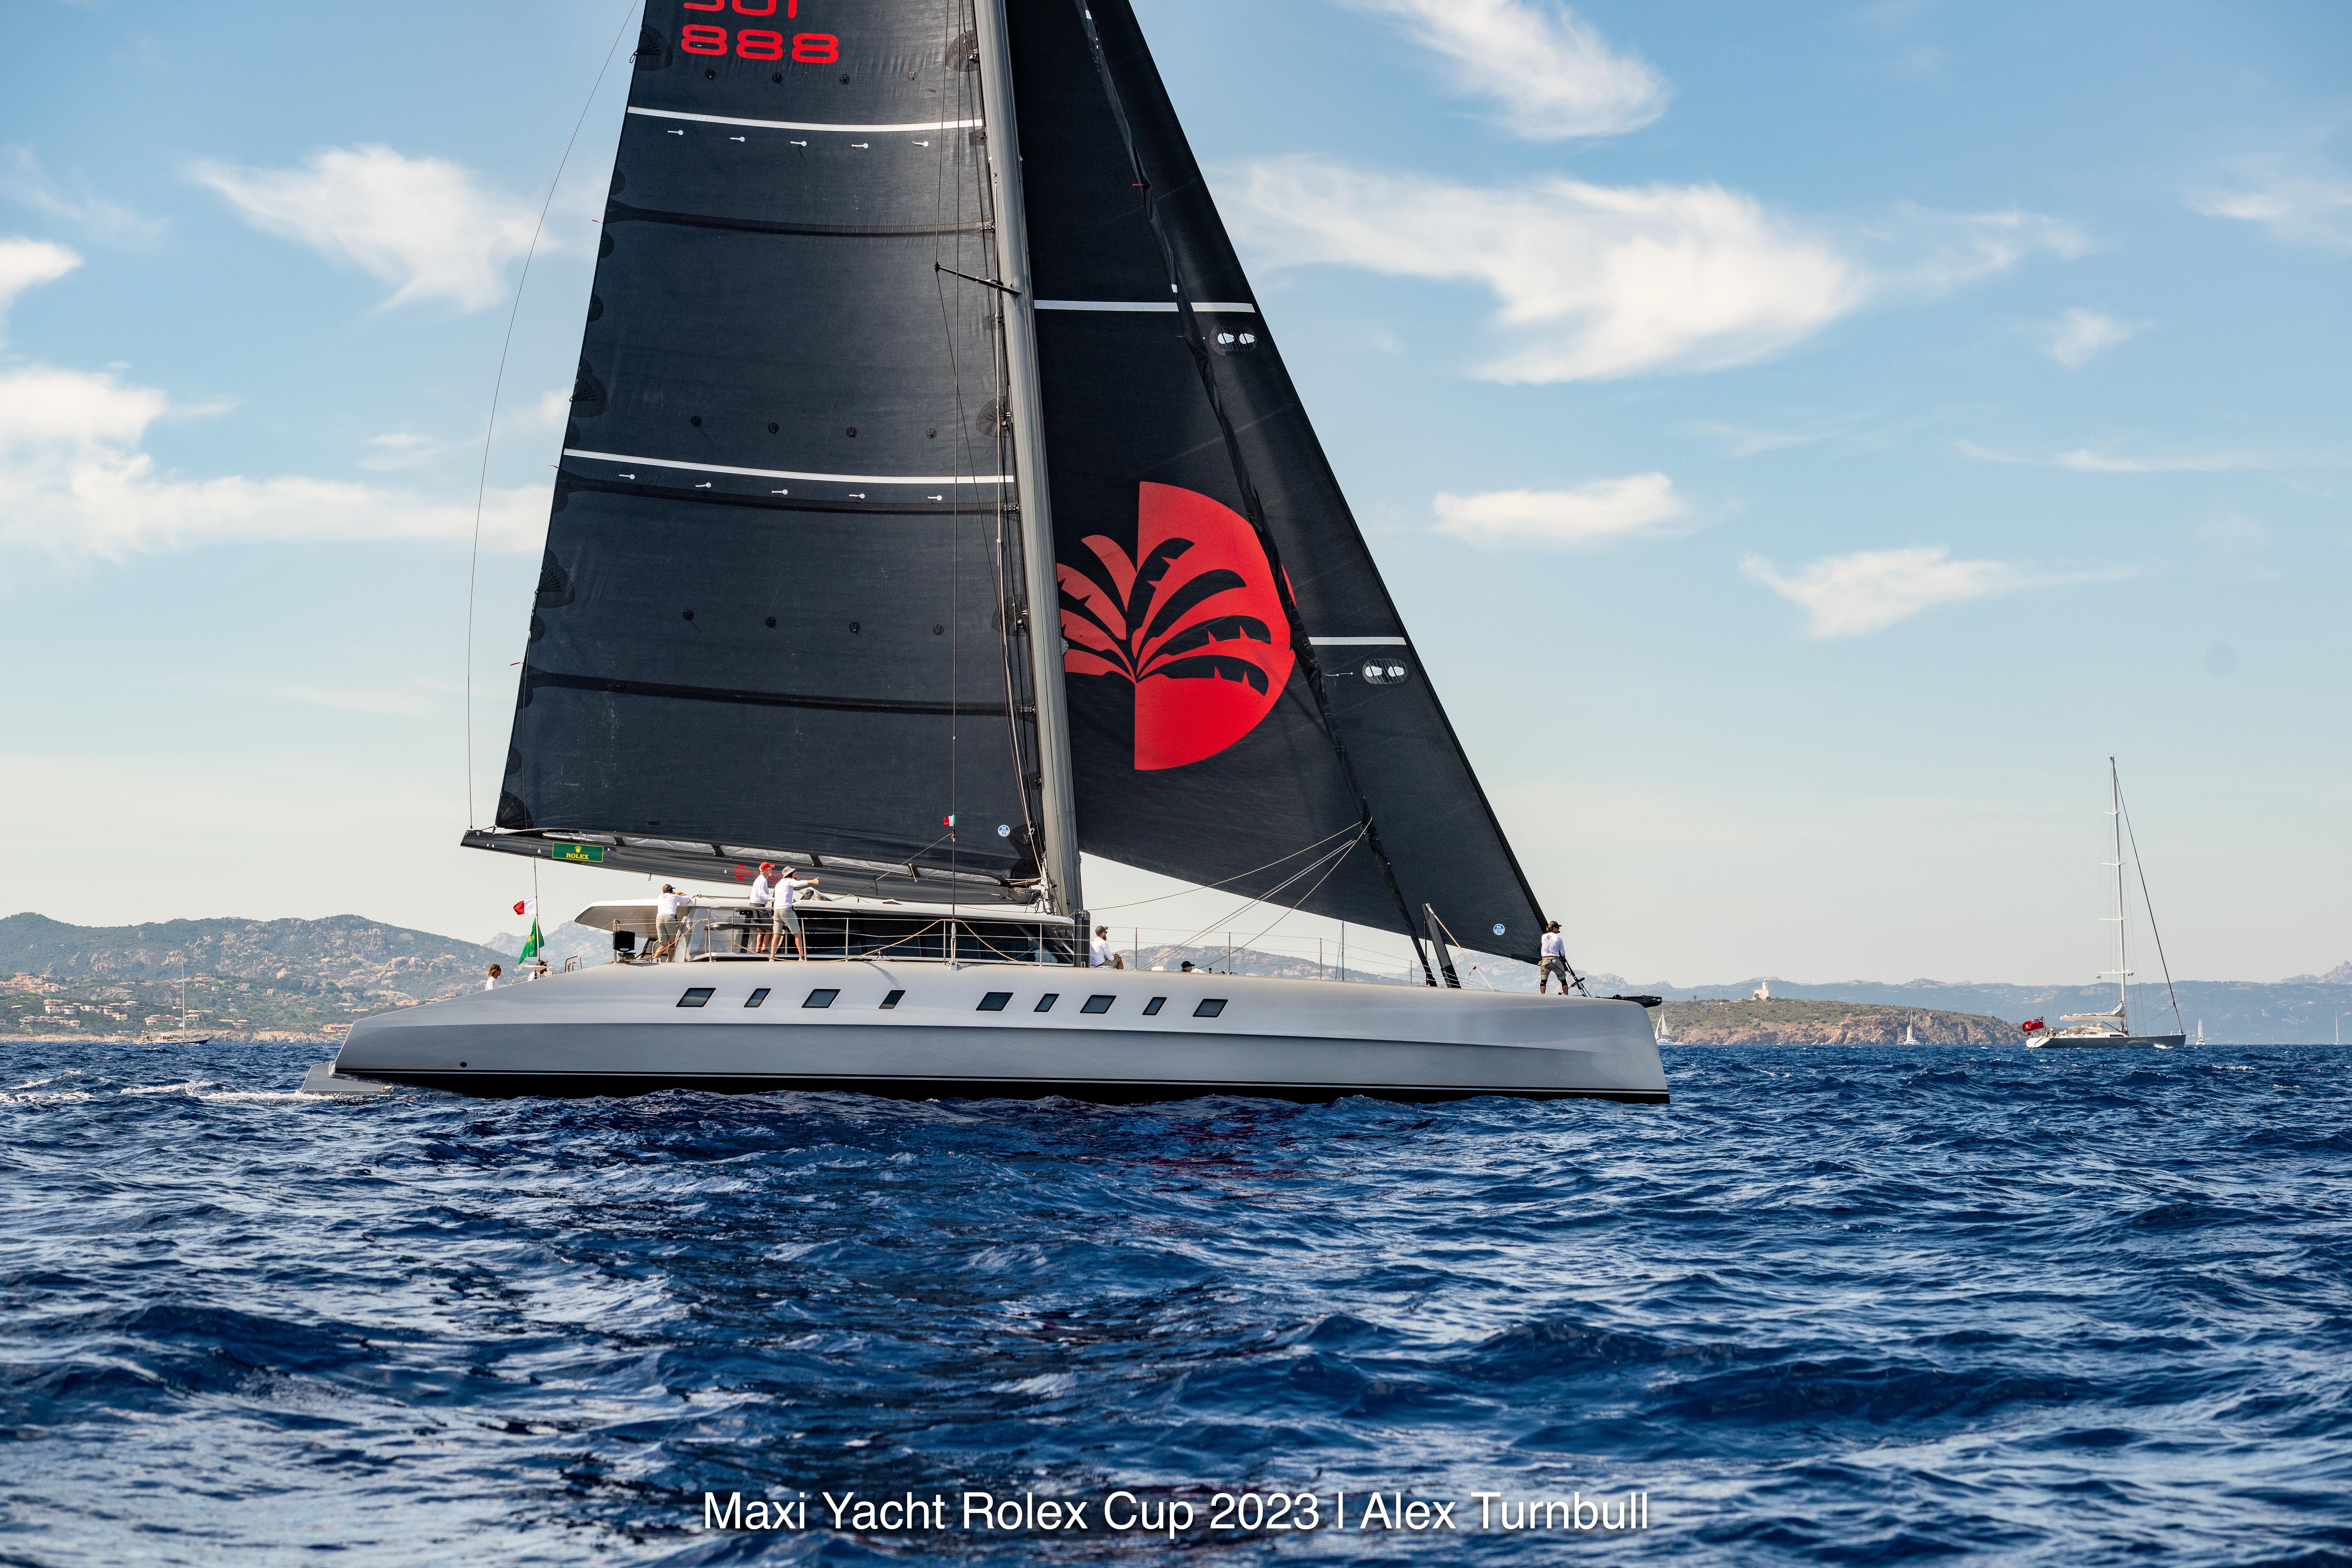 Allegra, winner of the day in the Multihull Class, Maxi Yacht Rolex Cup 2023. Photo credit: Alex Turnbull